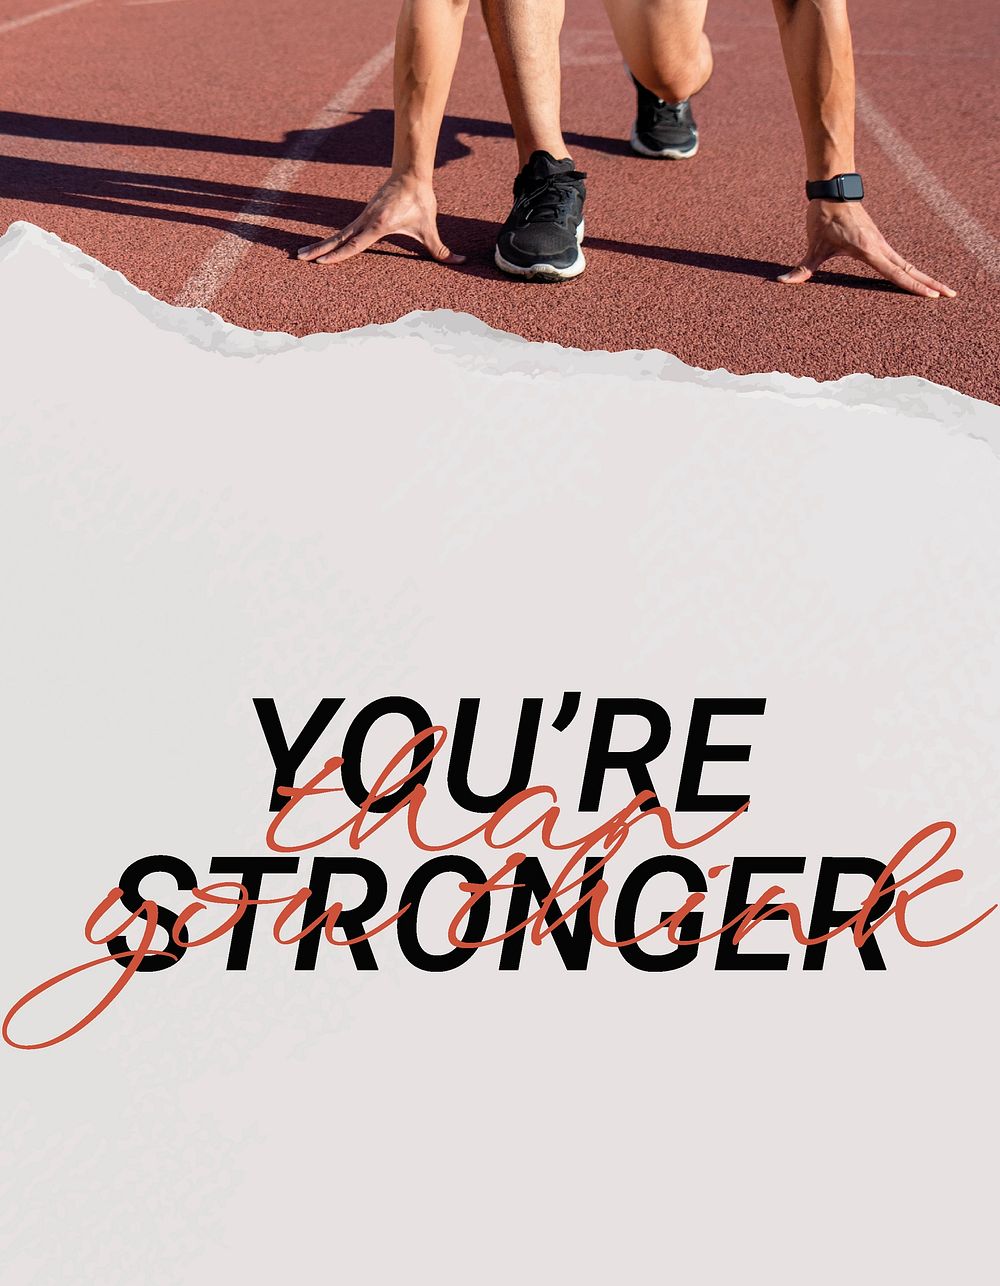 You're stronger flyer template, inspirational sports quote vector